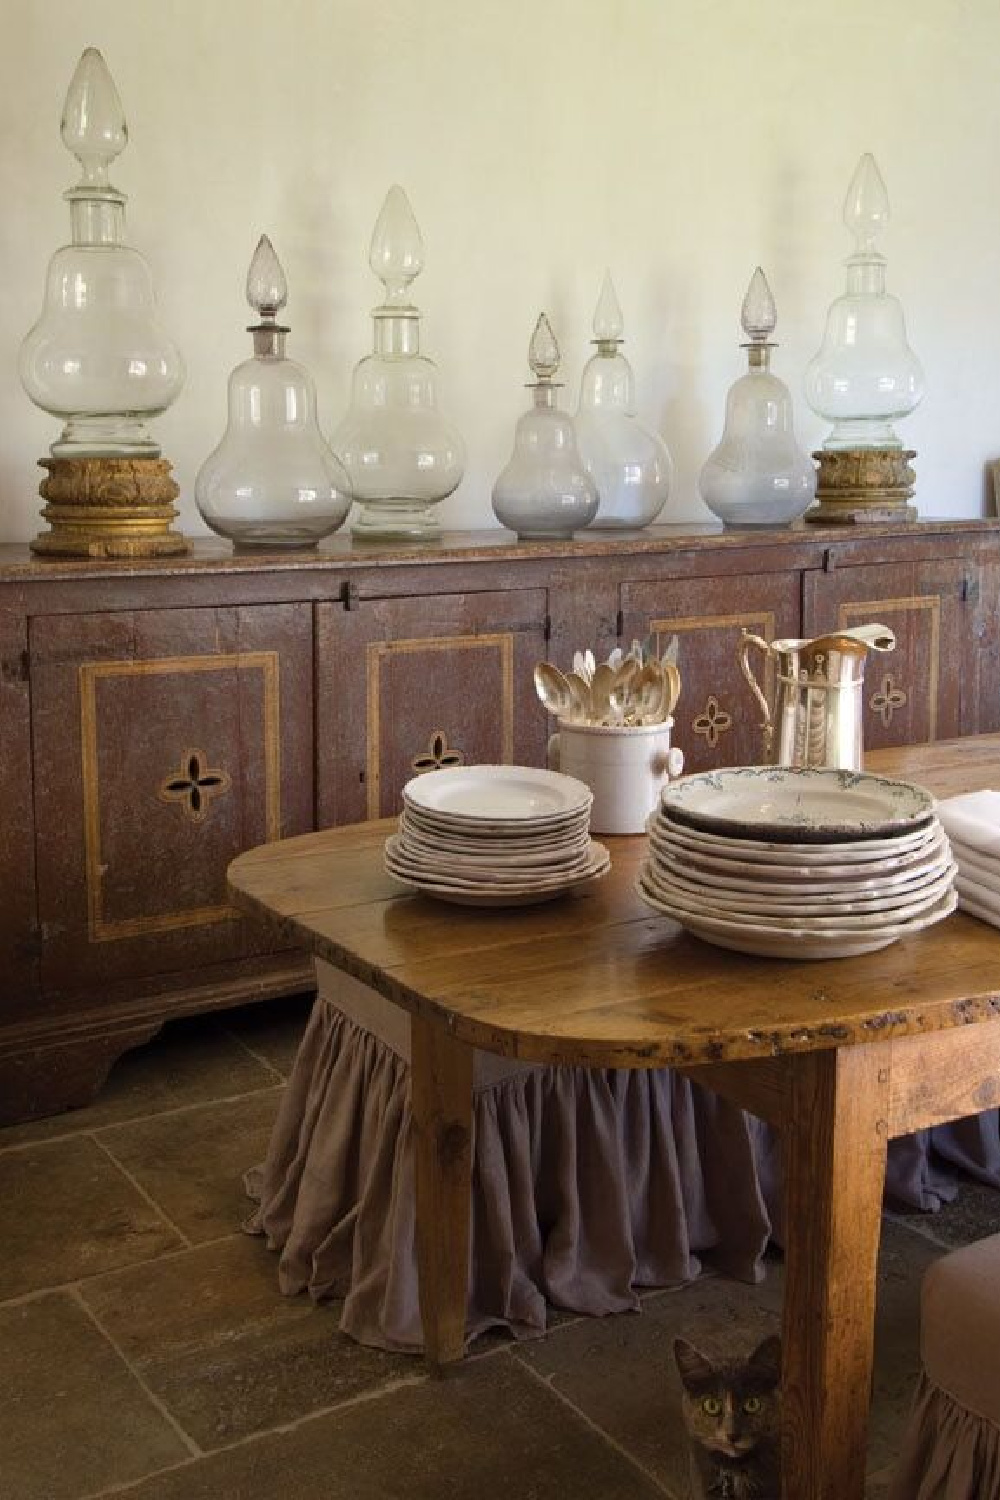 Antique French farmhouse table, sideboard, and collected European country treasures in Ruth Gay's dining room. Chateau Domingue Timeless European Elegance and French farmhouse style converge in this house tour of founder Ruth Gay's home on Hello Lovely. Reclaimed stone, antique doors and mantels, and one of a kind architectural elements. #housetour #frenchcountry #frenchfarmhouse #europeanfarmhouse #chateaudomingue #rusticdecor #pamelapierce #elegantdecor #apothecaryjars #diningroom